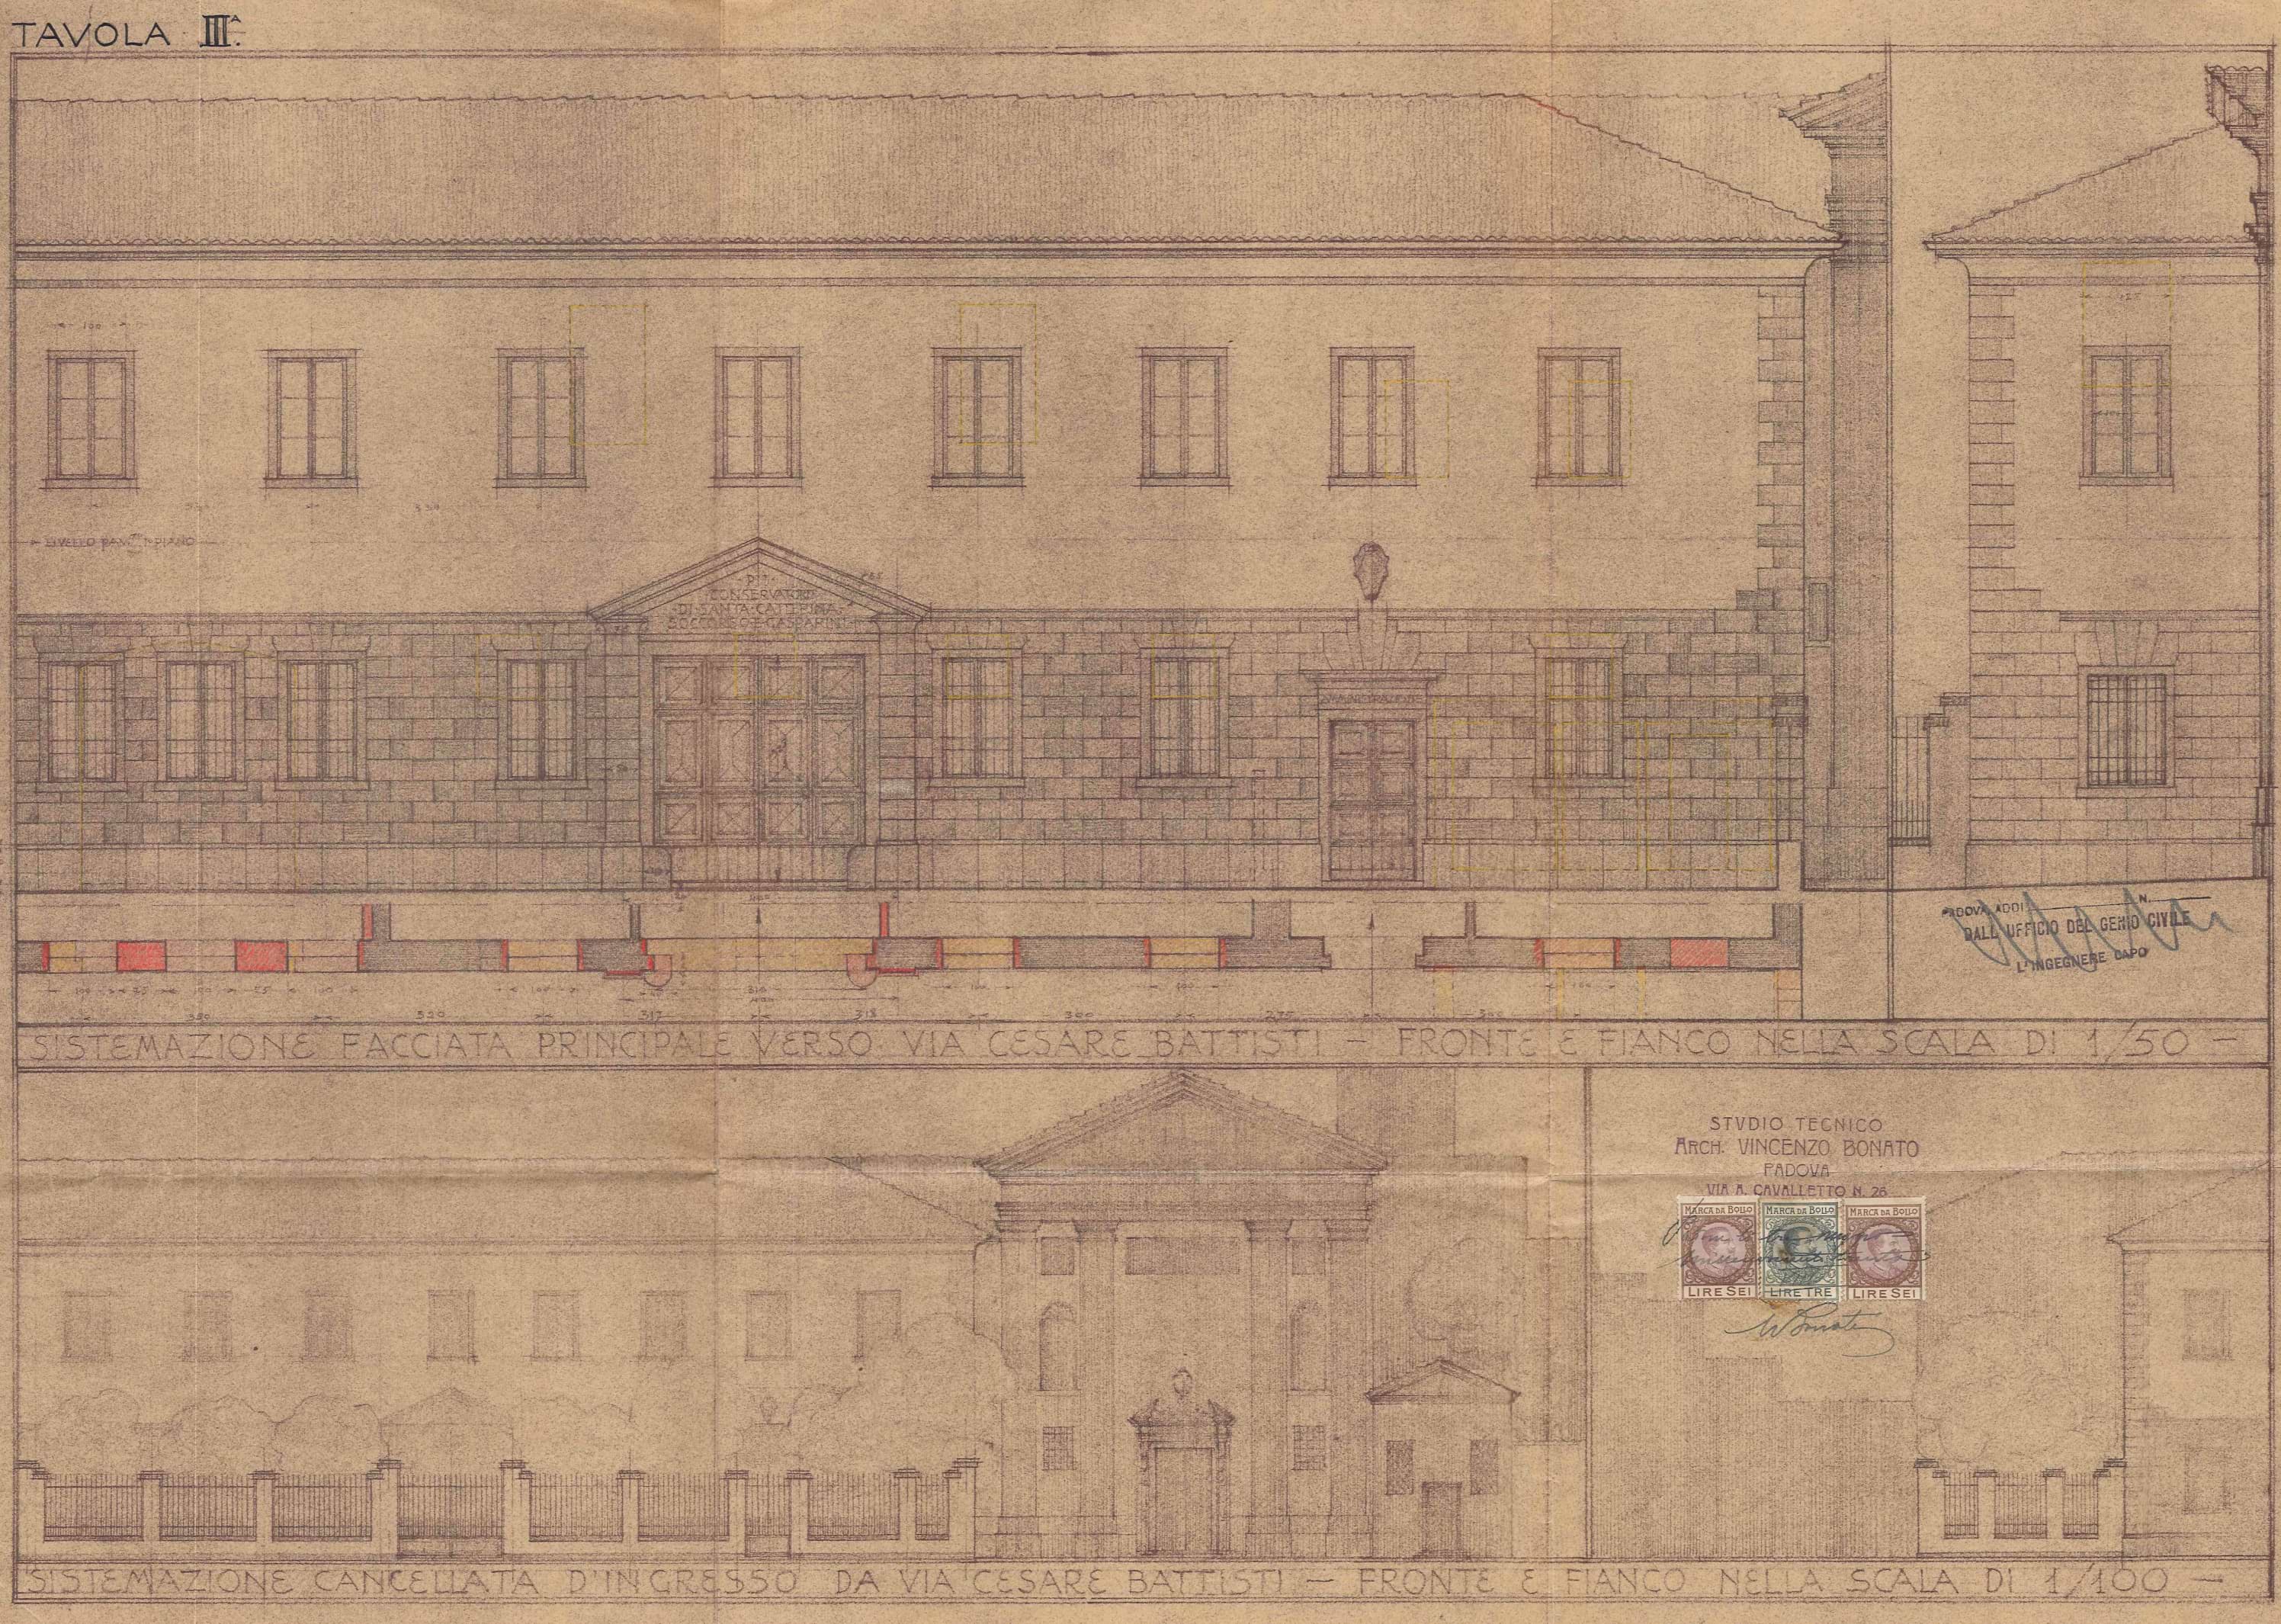 Project for the new facade of the Pii Conservatori